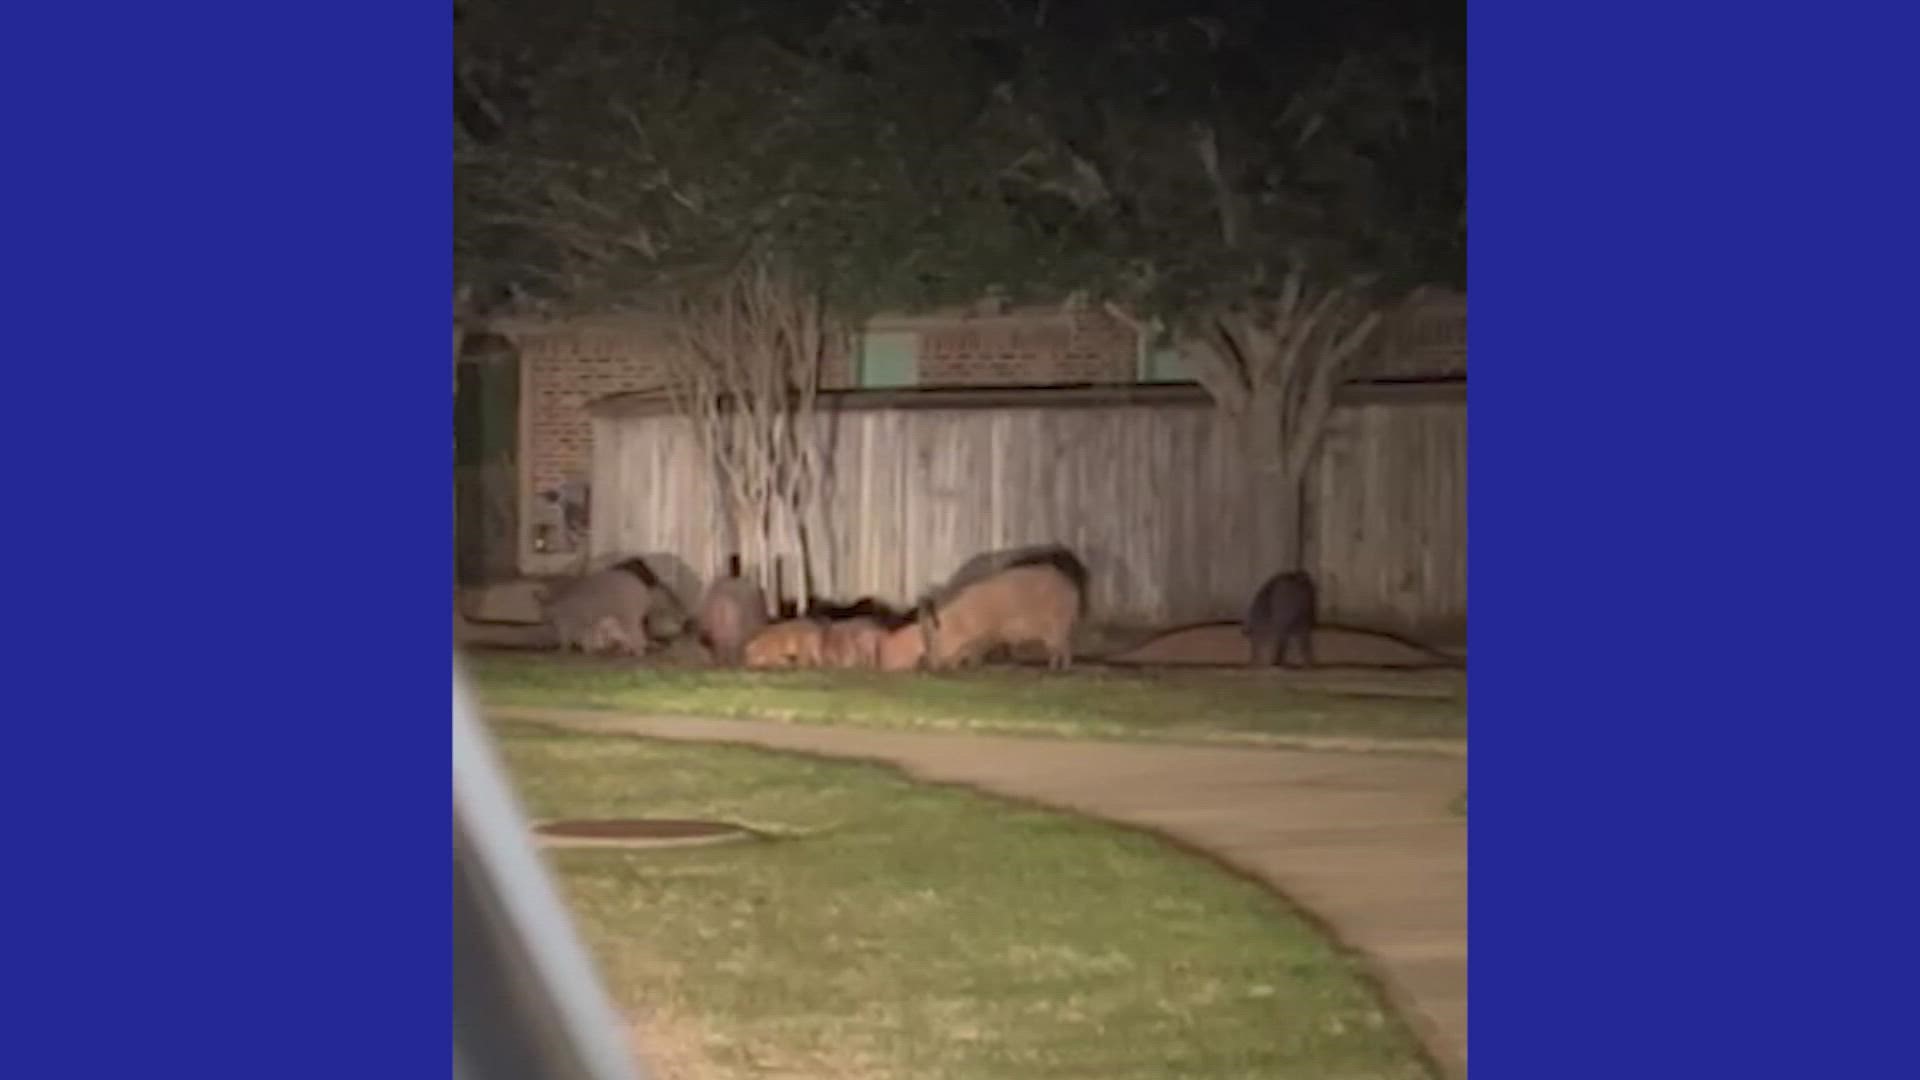 Residents who exercise or walk their pets at night are being told to be on high alert due to the dangerous animals.